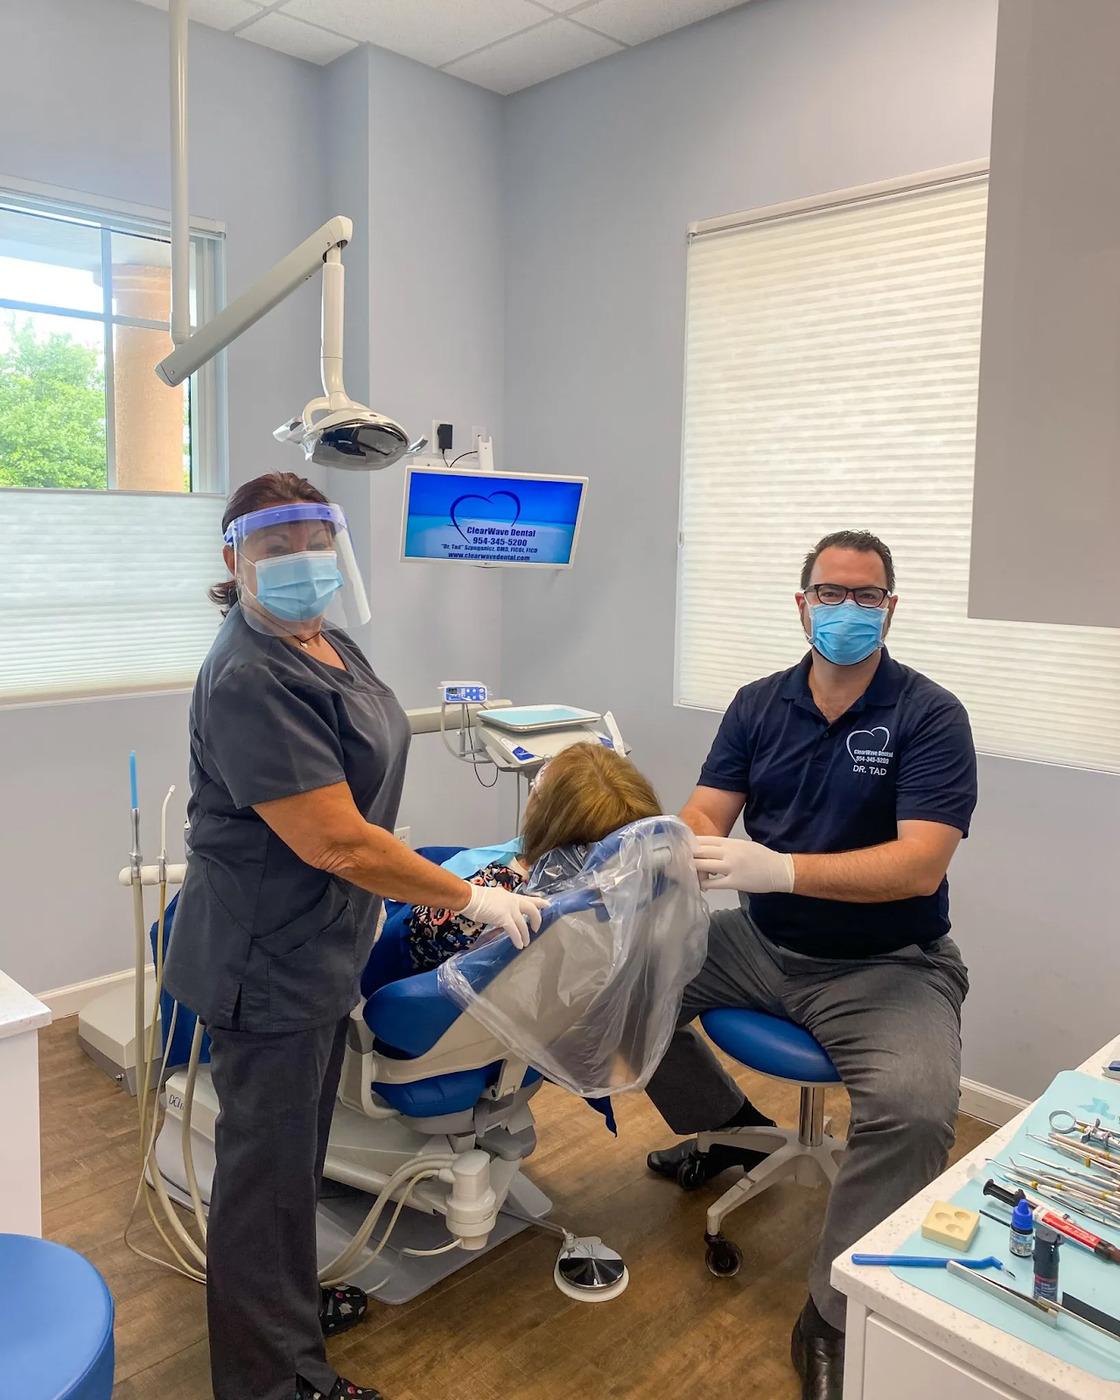 ClearWave Dental & Aesthetics provides comprehensive dental and aesthetic services in Coral Springs, FL.